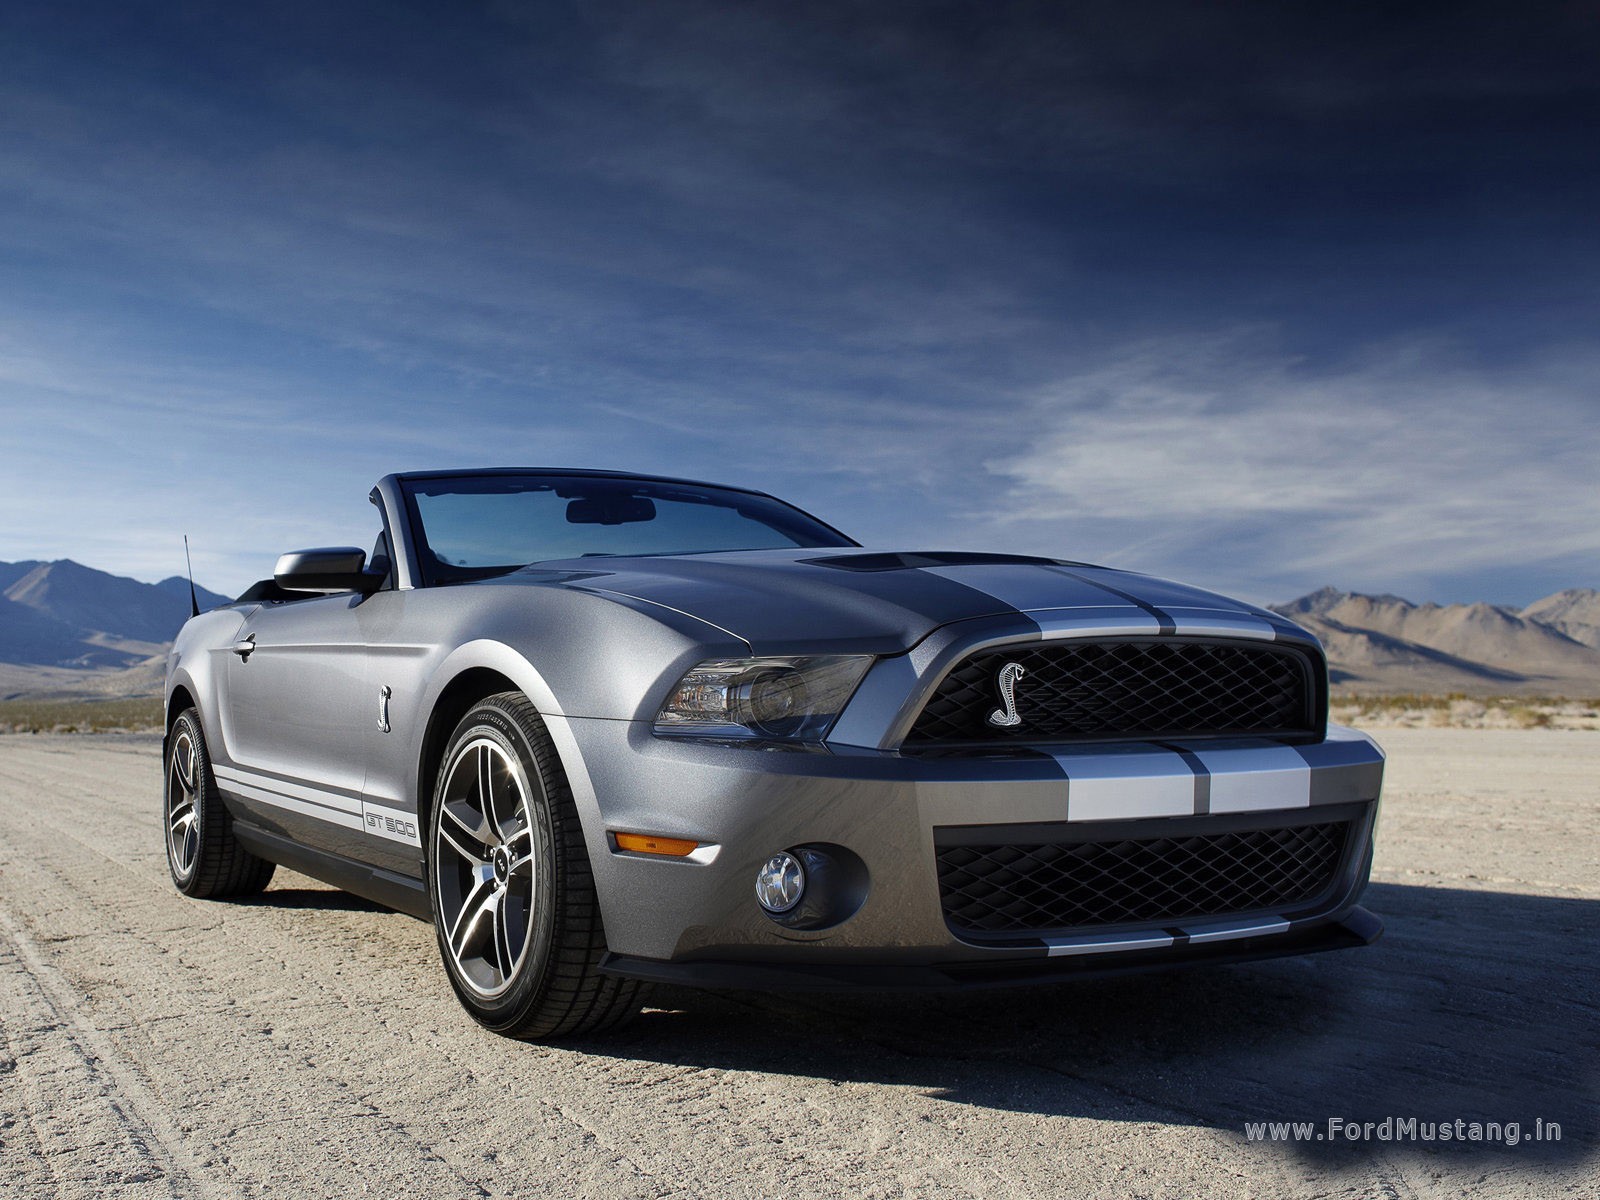 2010 Ford mustang shelby gt convertible #2